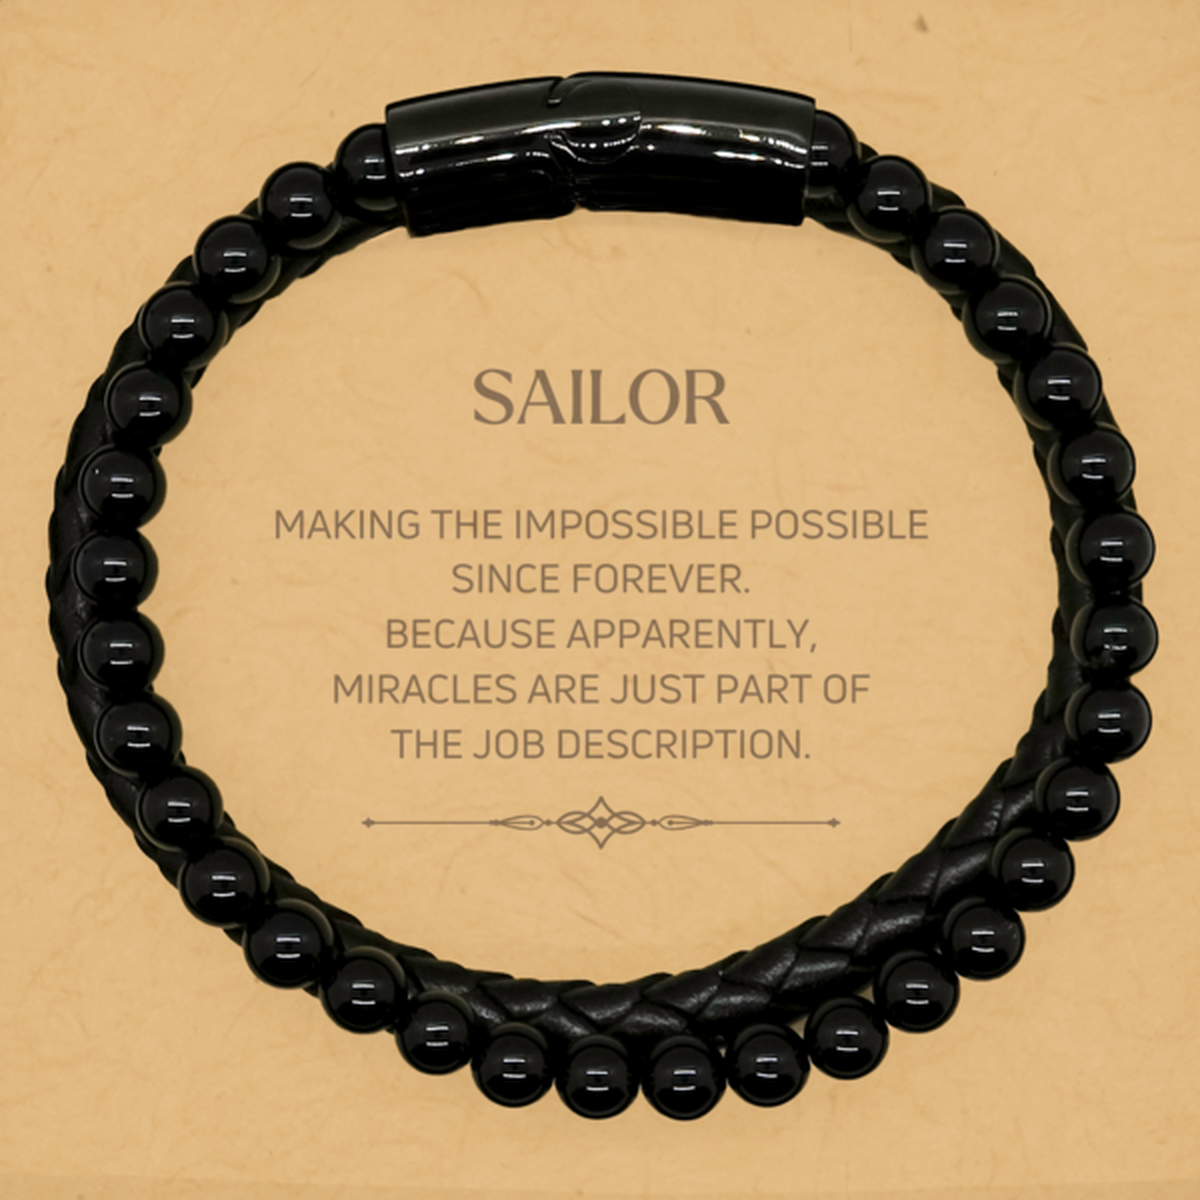 Funny Sailor Gifts, Miracles are just part of the job description, Inspirational Birthday Stone Leather Bracelets For Sailor, Men, Women, Coworkers, Friends, Boss